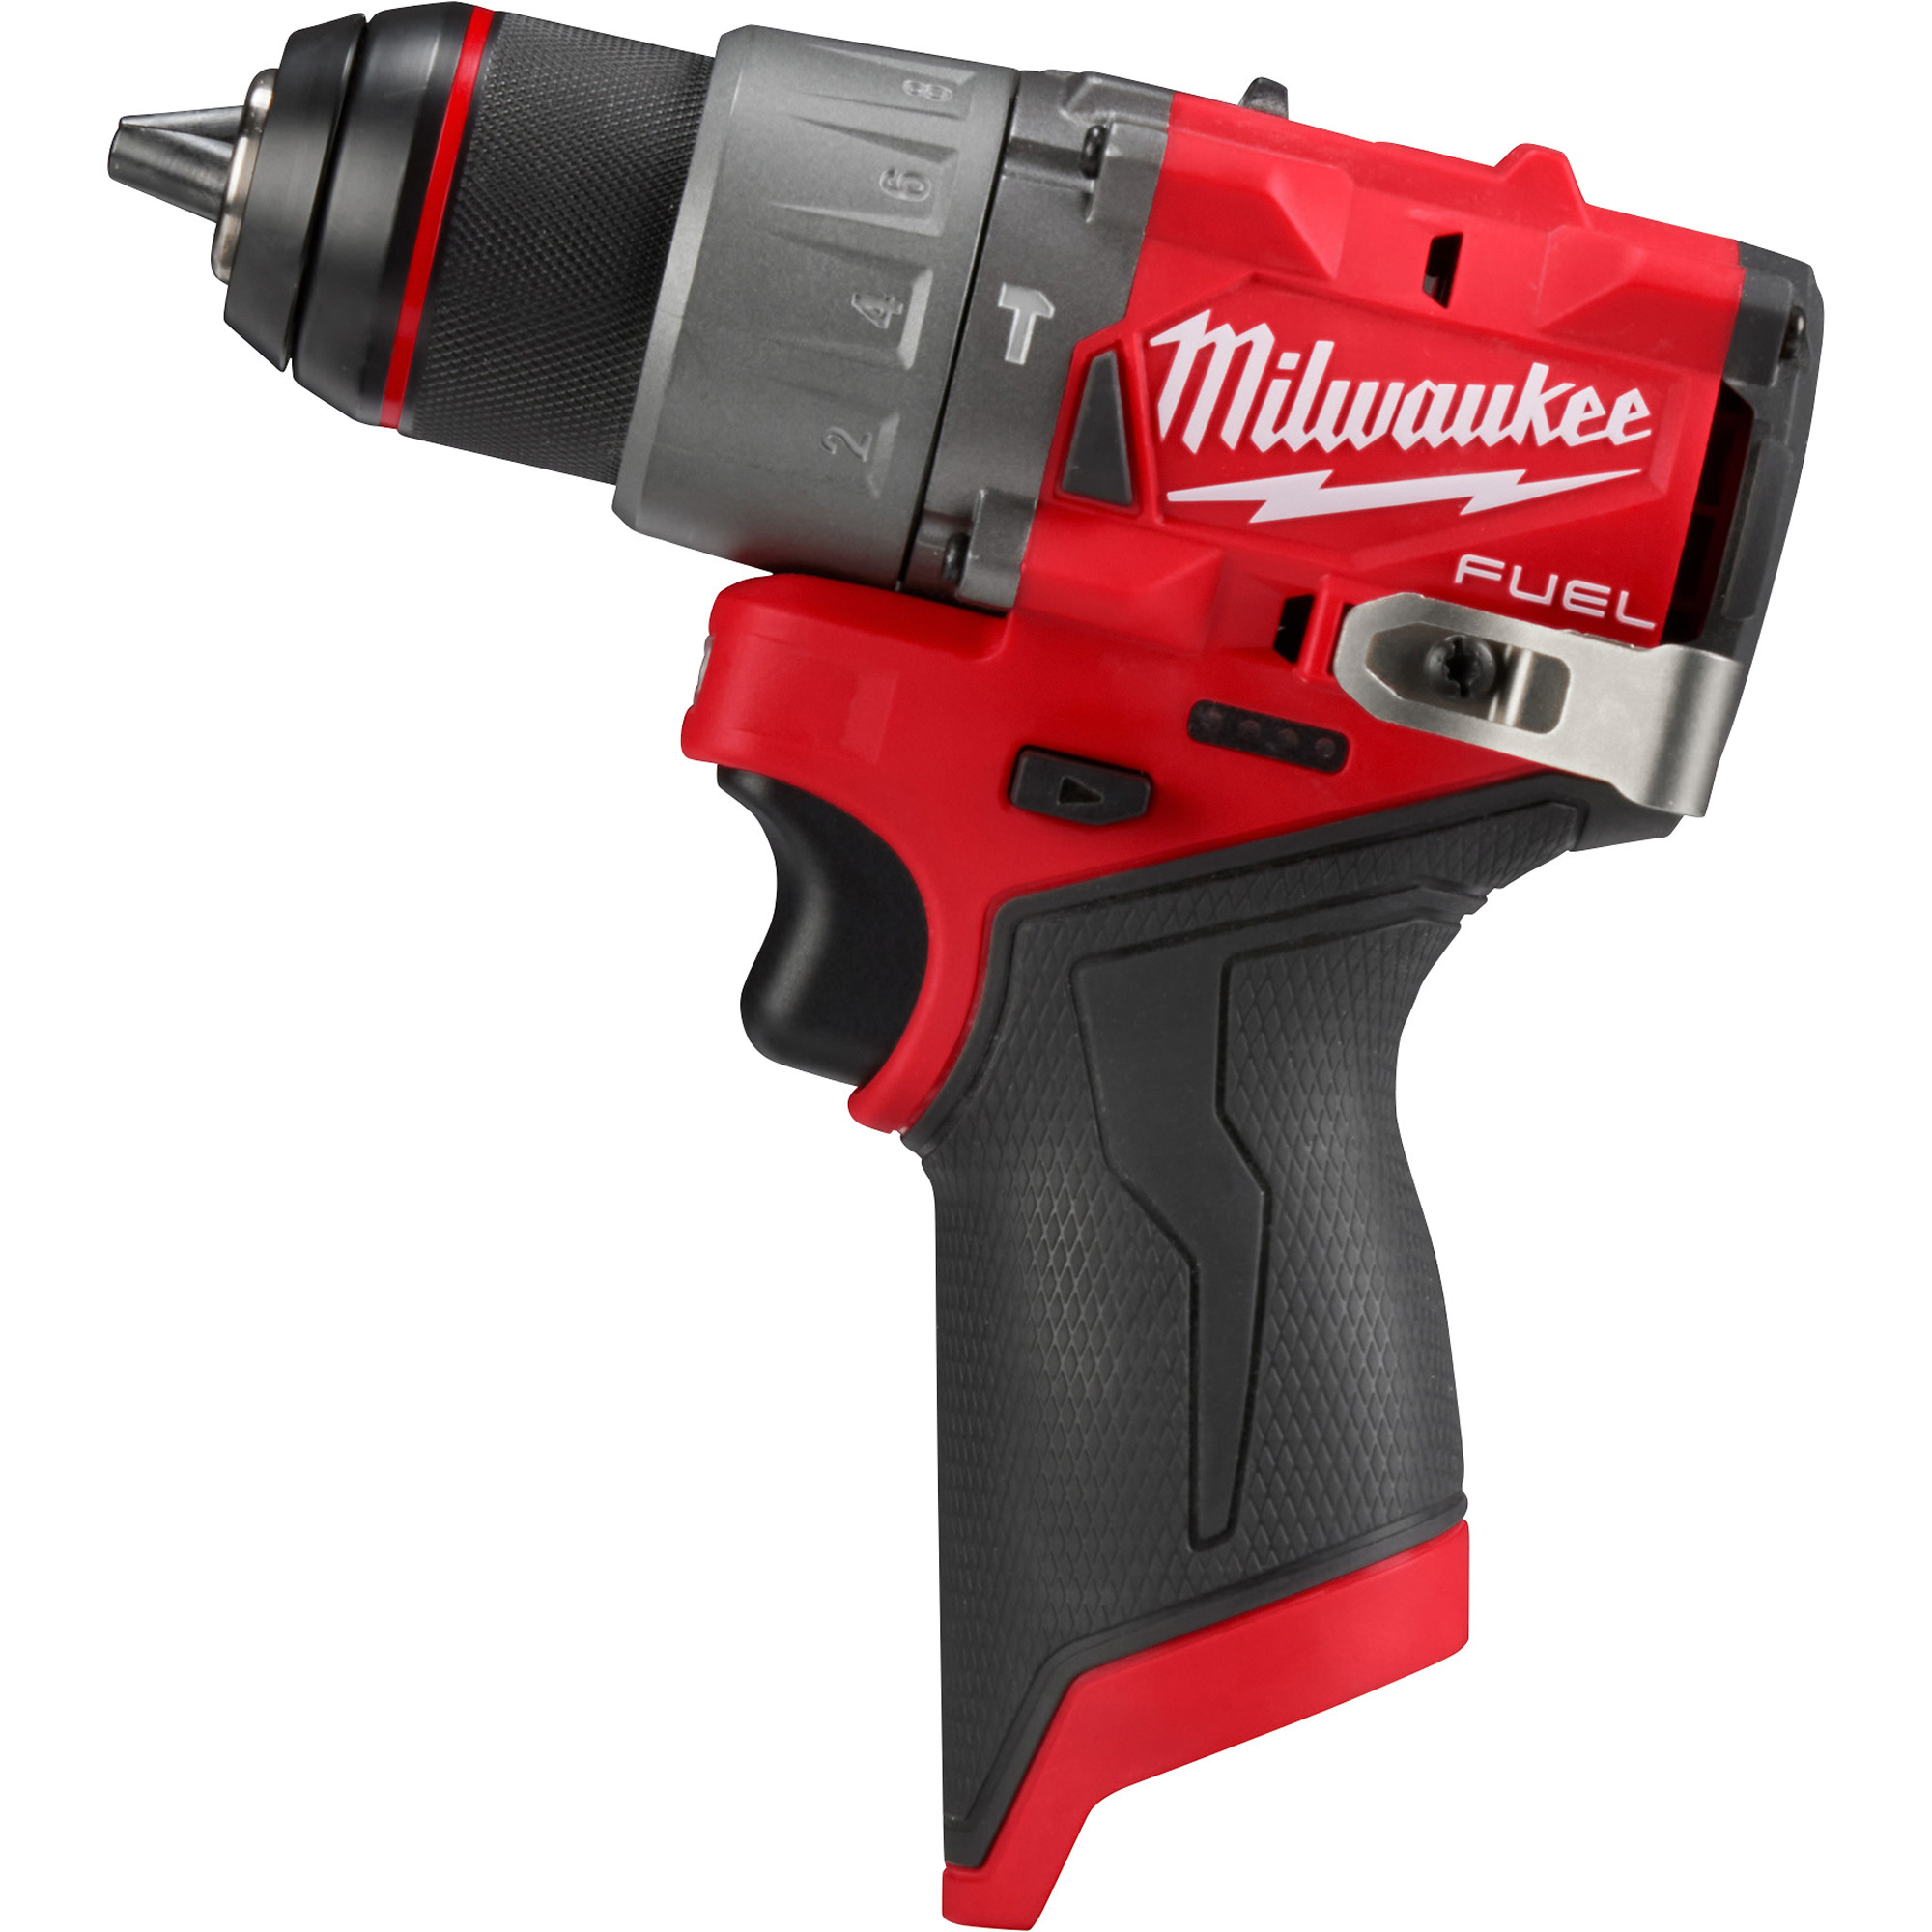 Milwaukee M12 FUEL 1/2Inch Hammer Drill/Driver, Tool Only, Model 3404-20